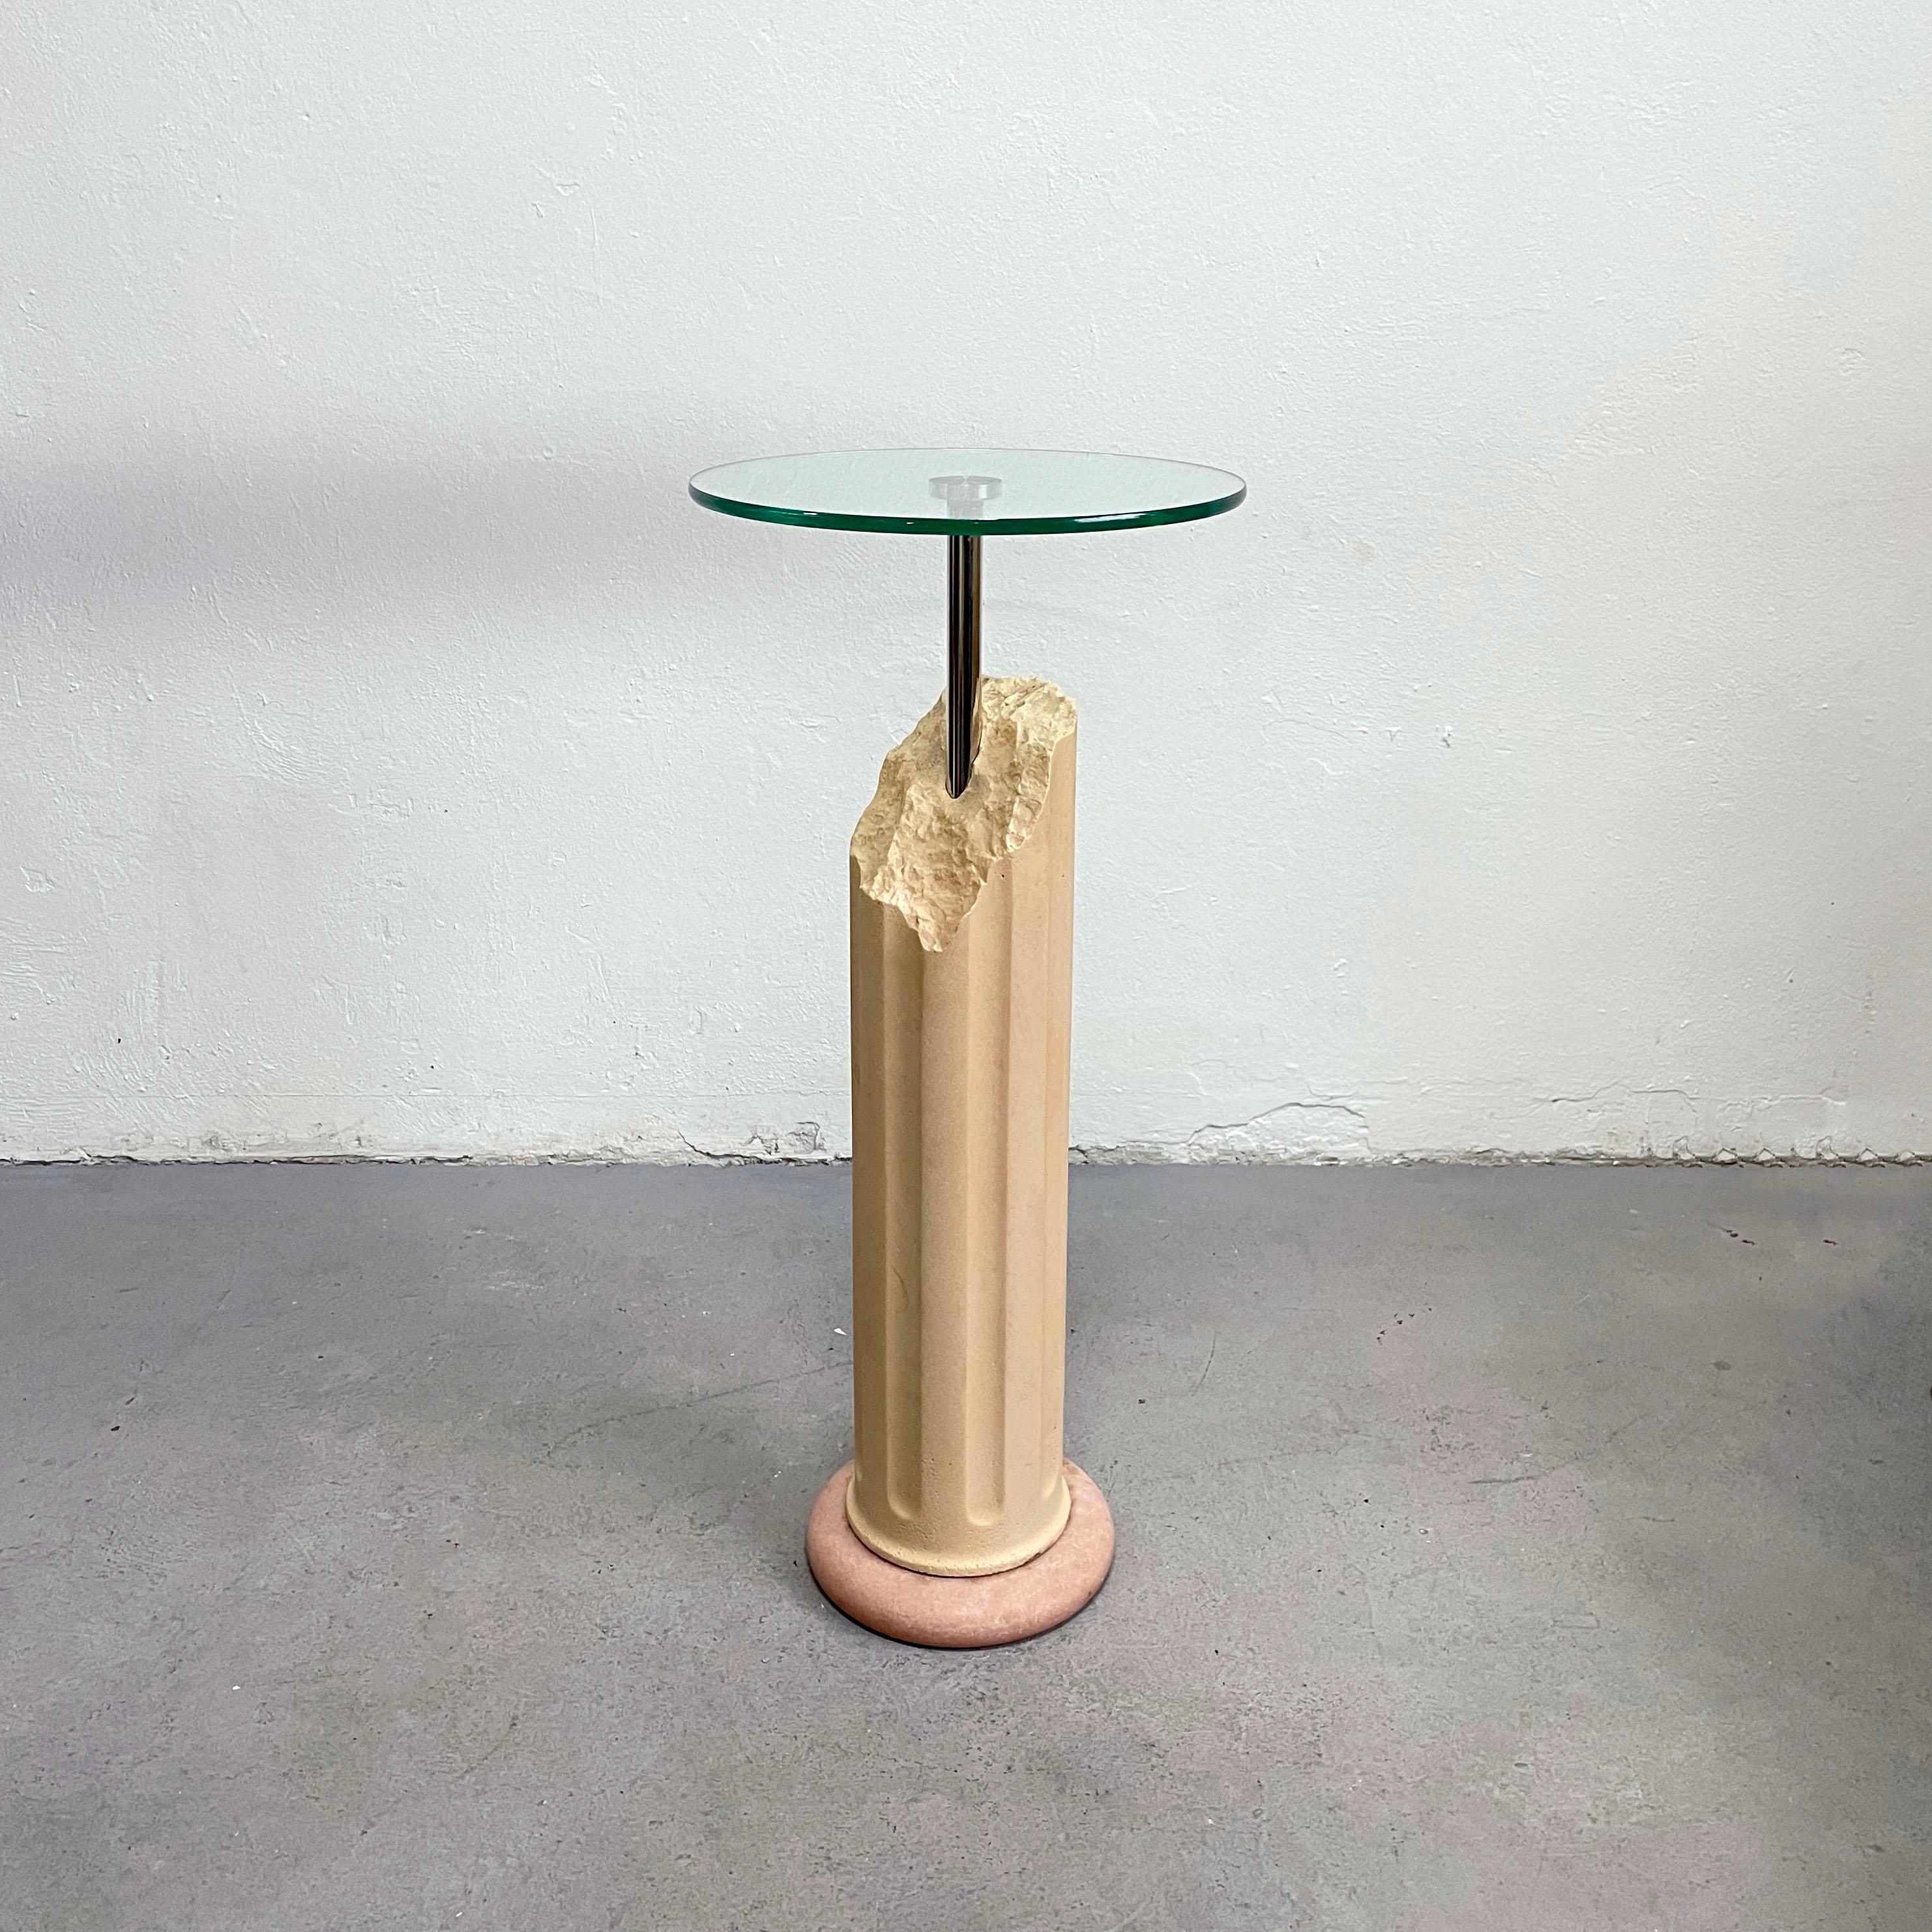 European Postmodern Pedestal or Plant Stand, Italy 1990s For Sale